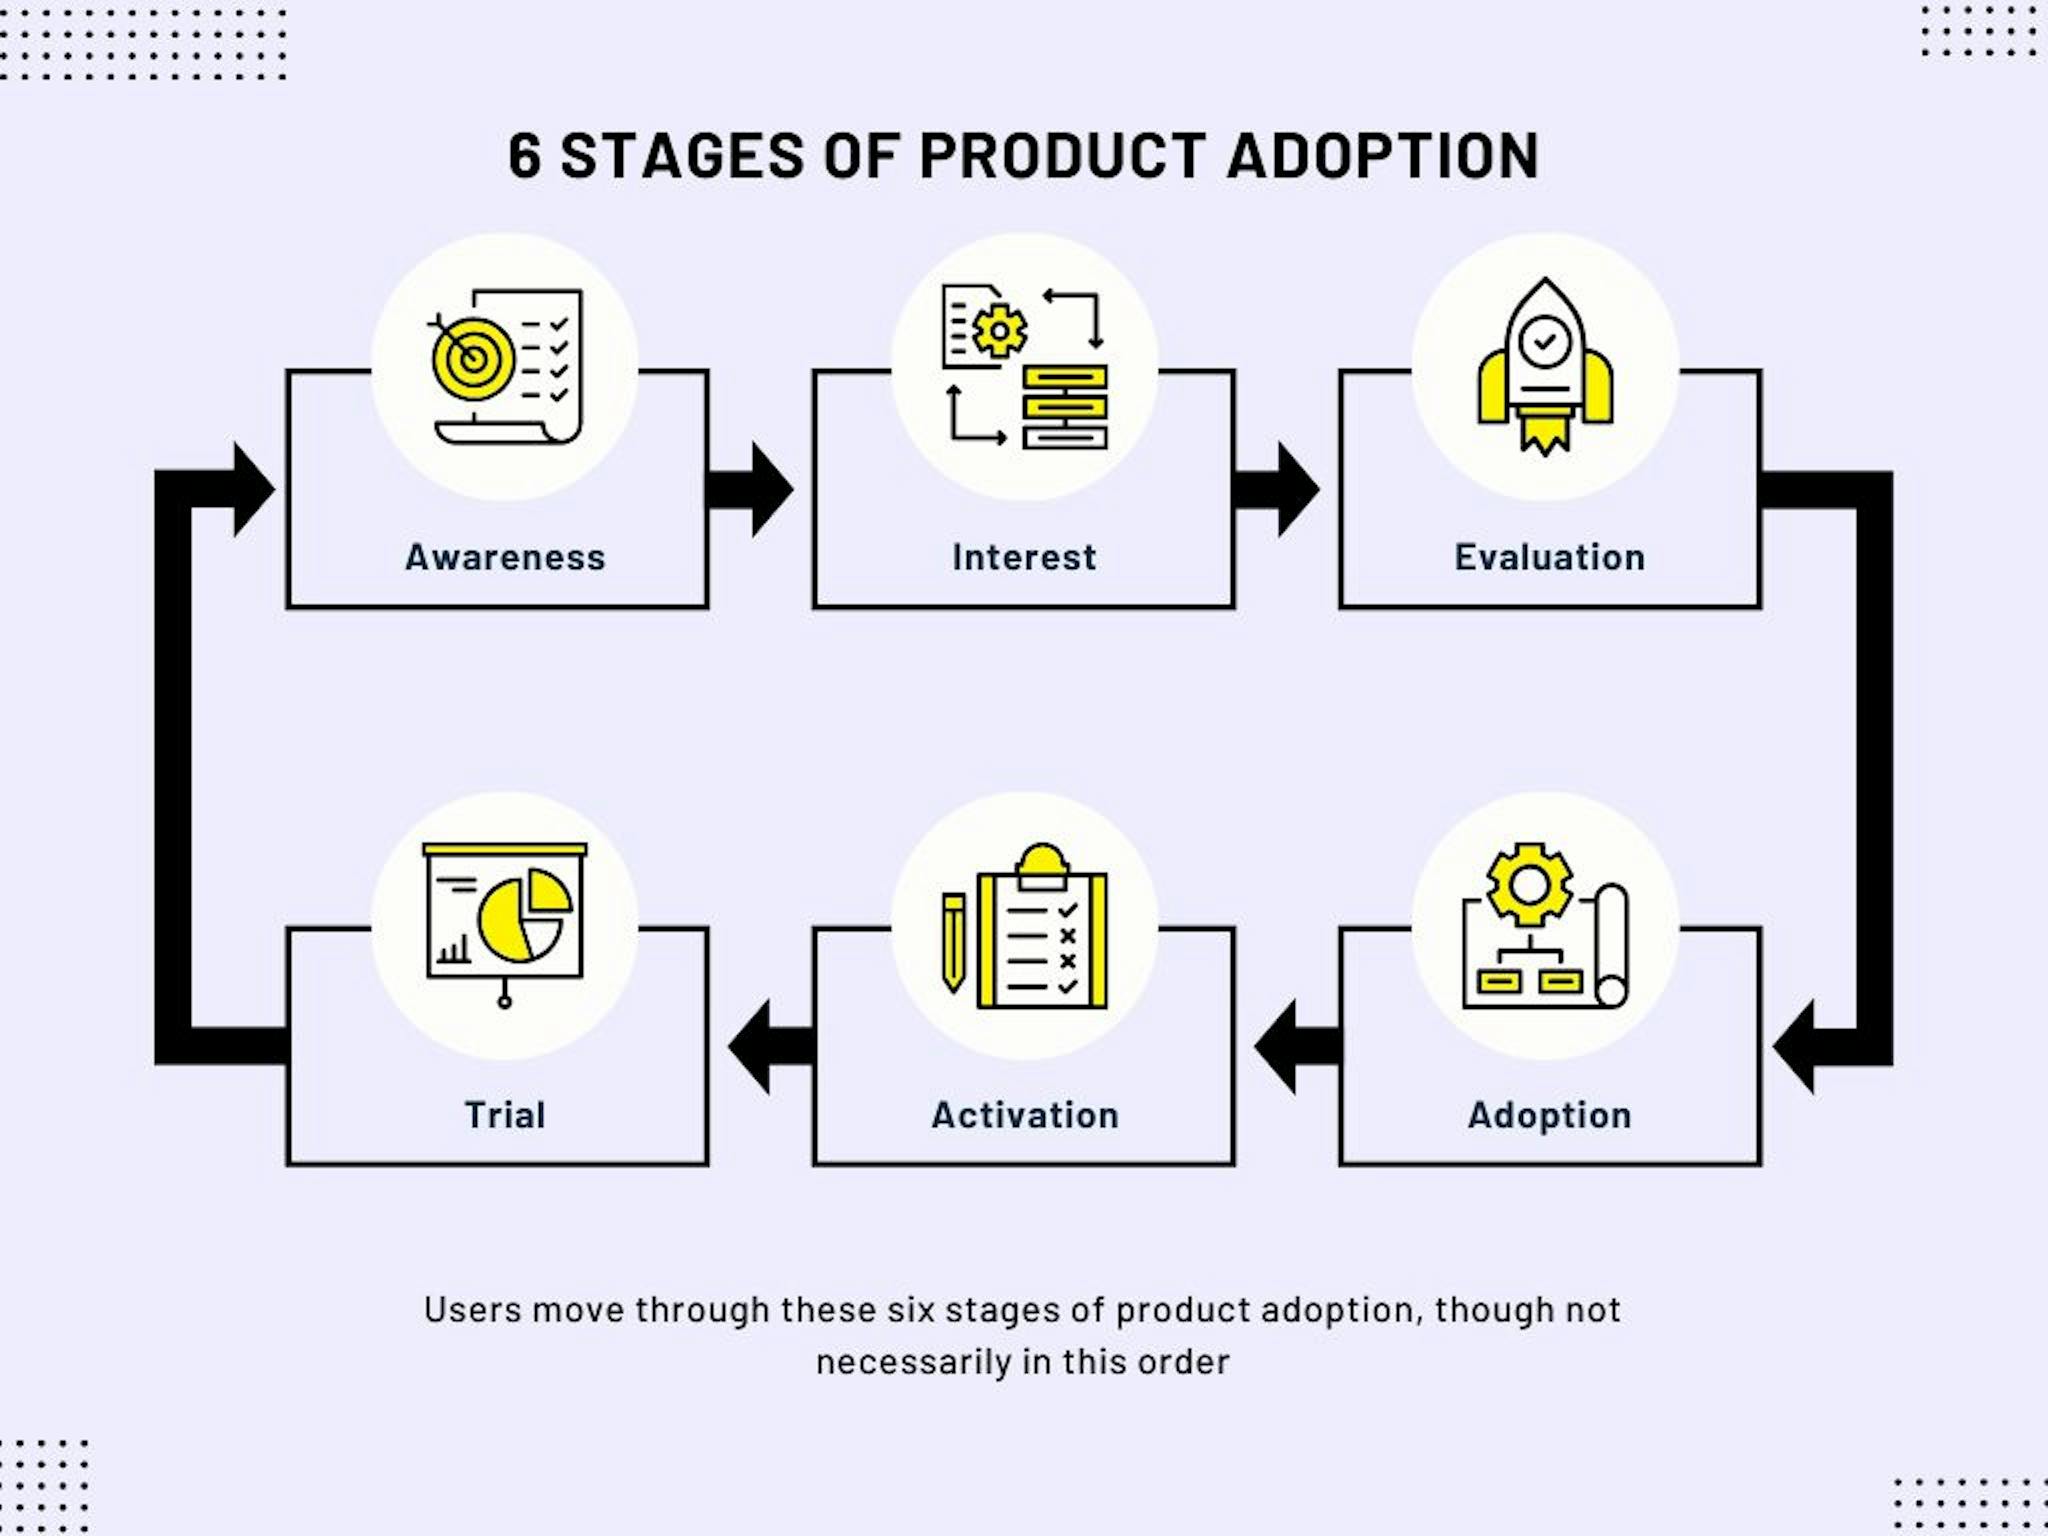 6 stages of product adoption